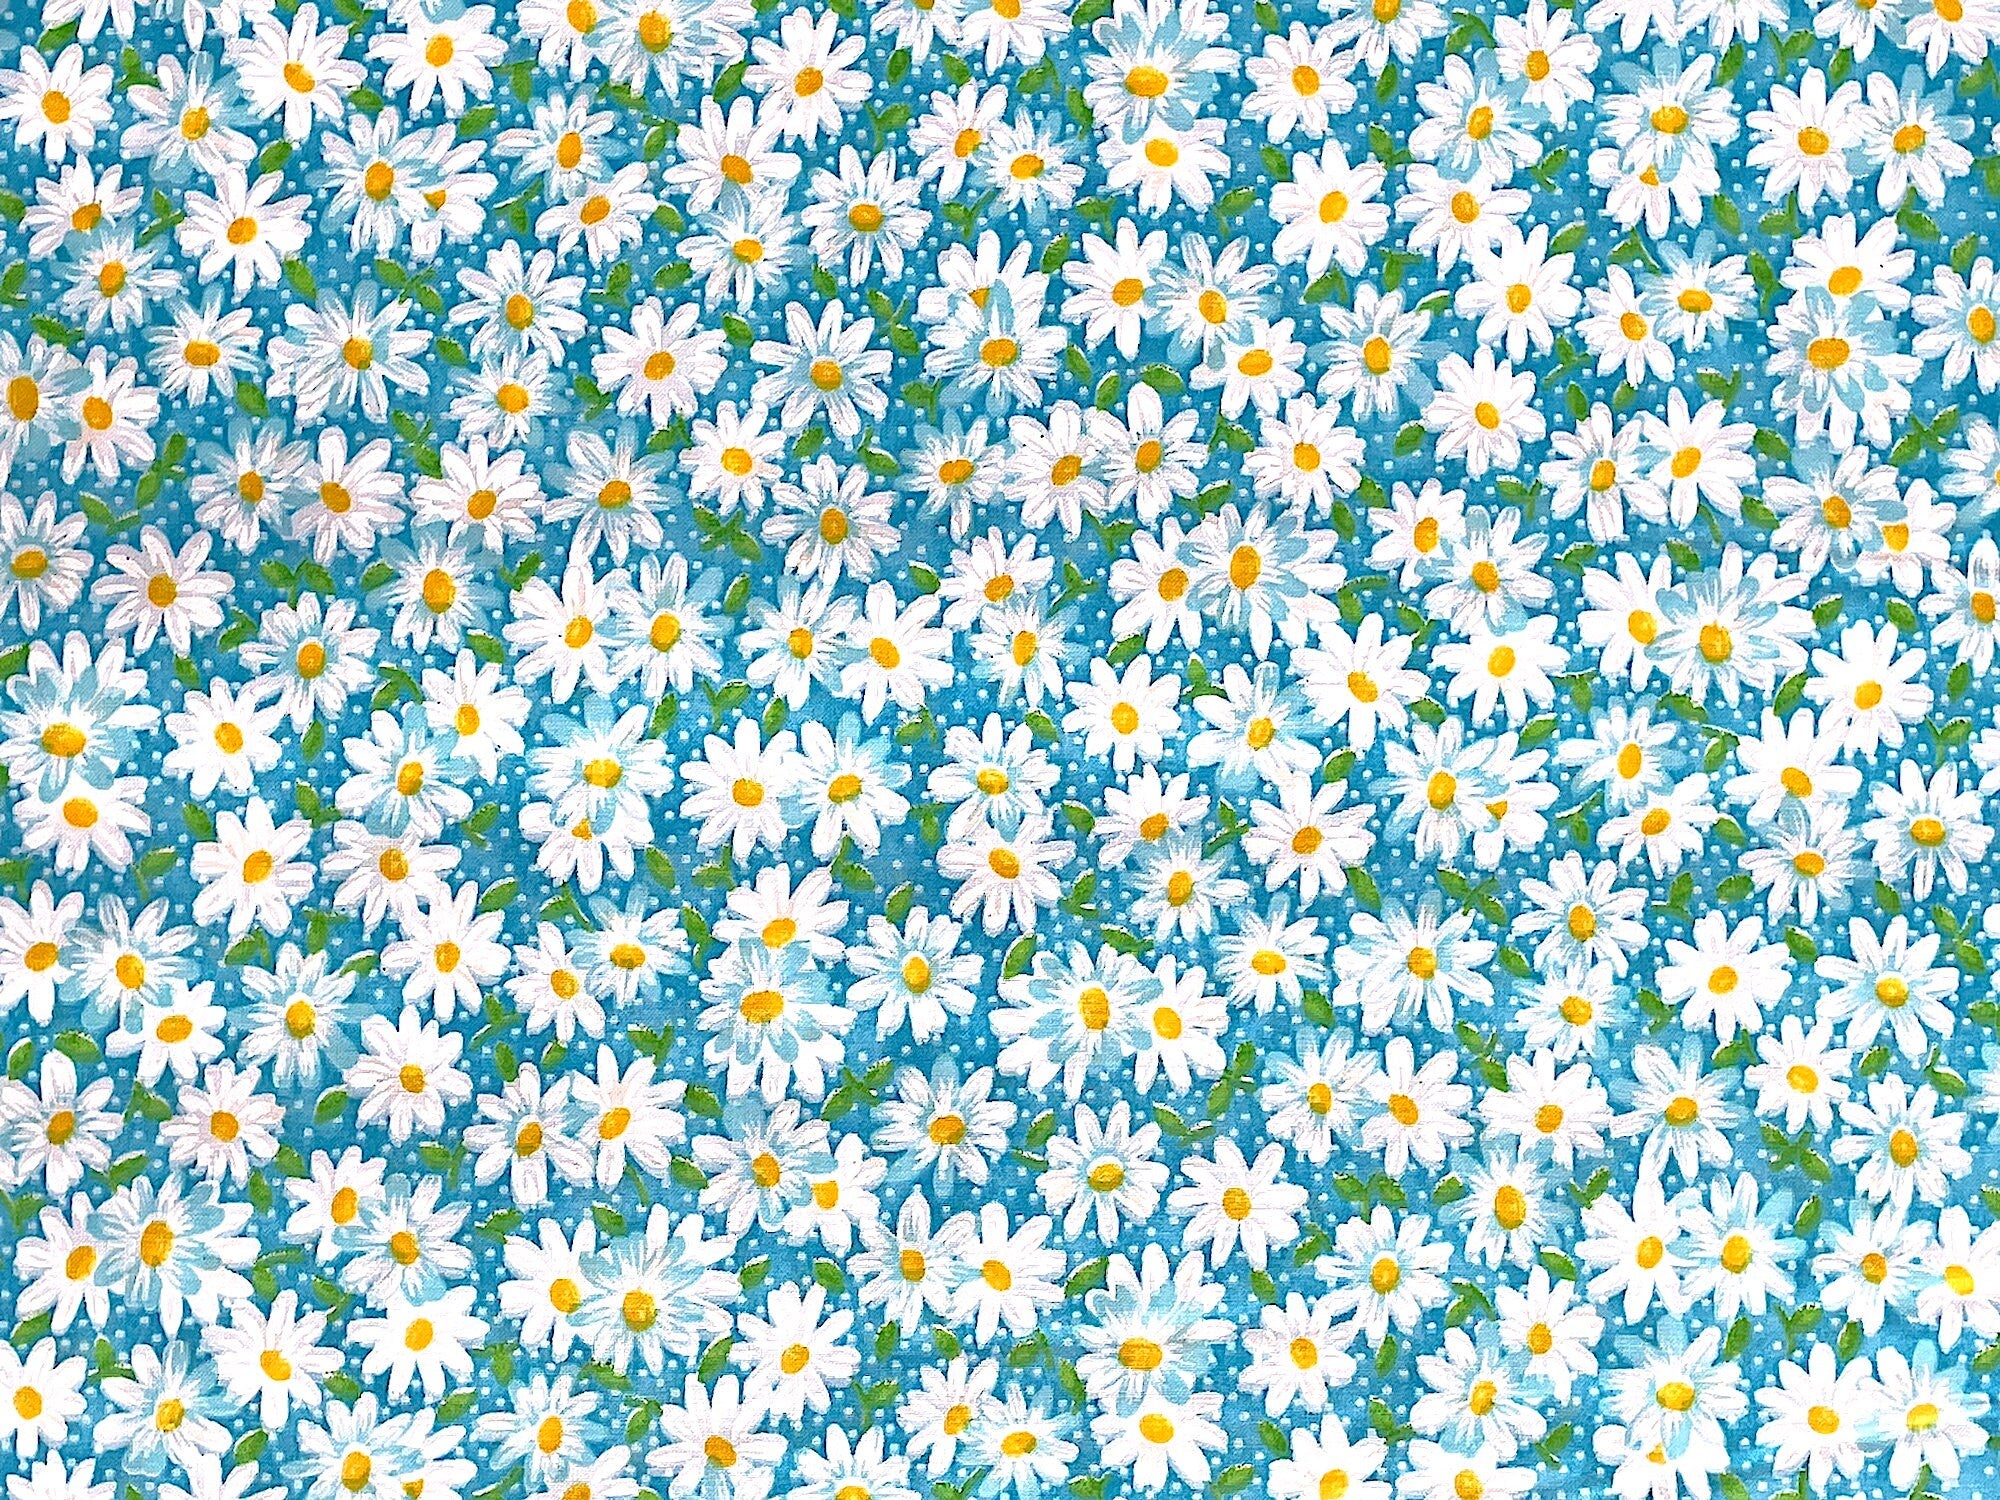 White Daisies with yellow centers on a teal background.